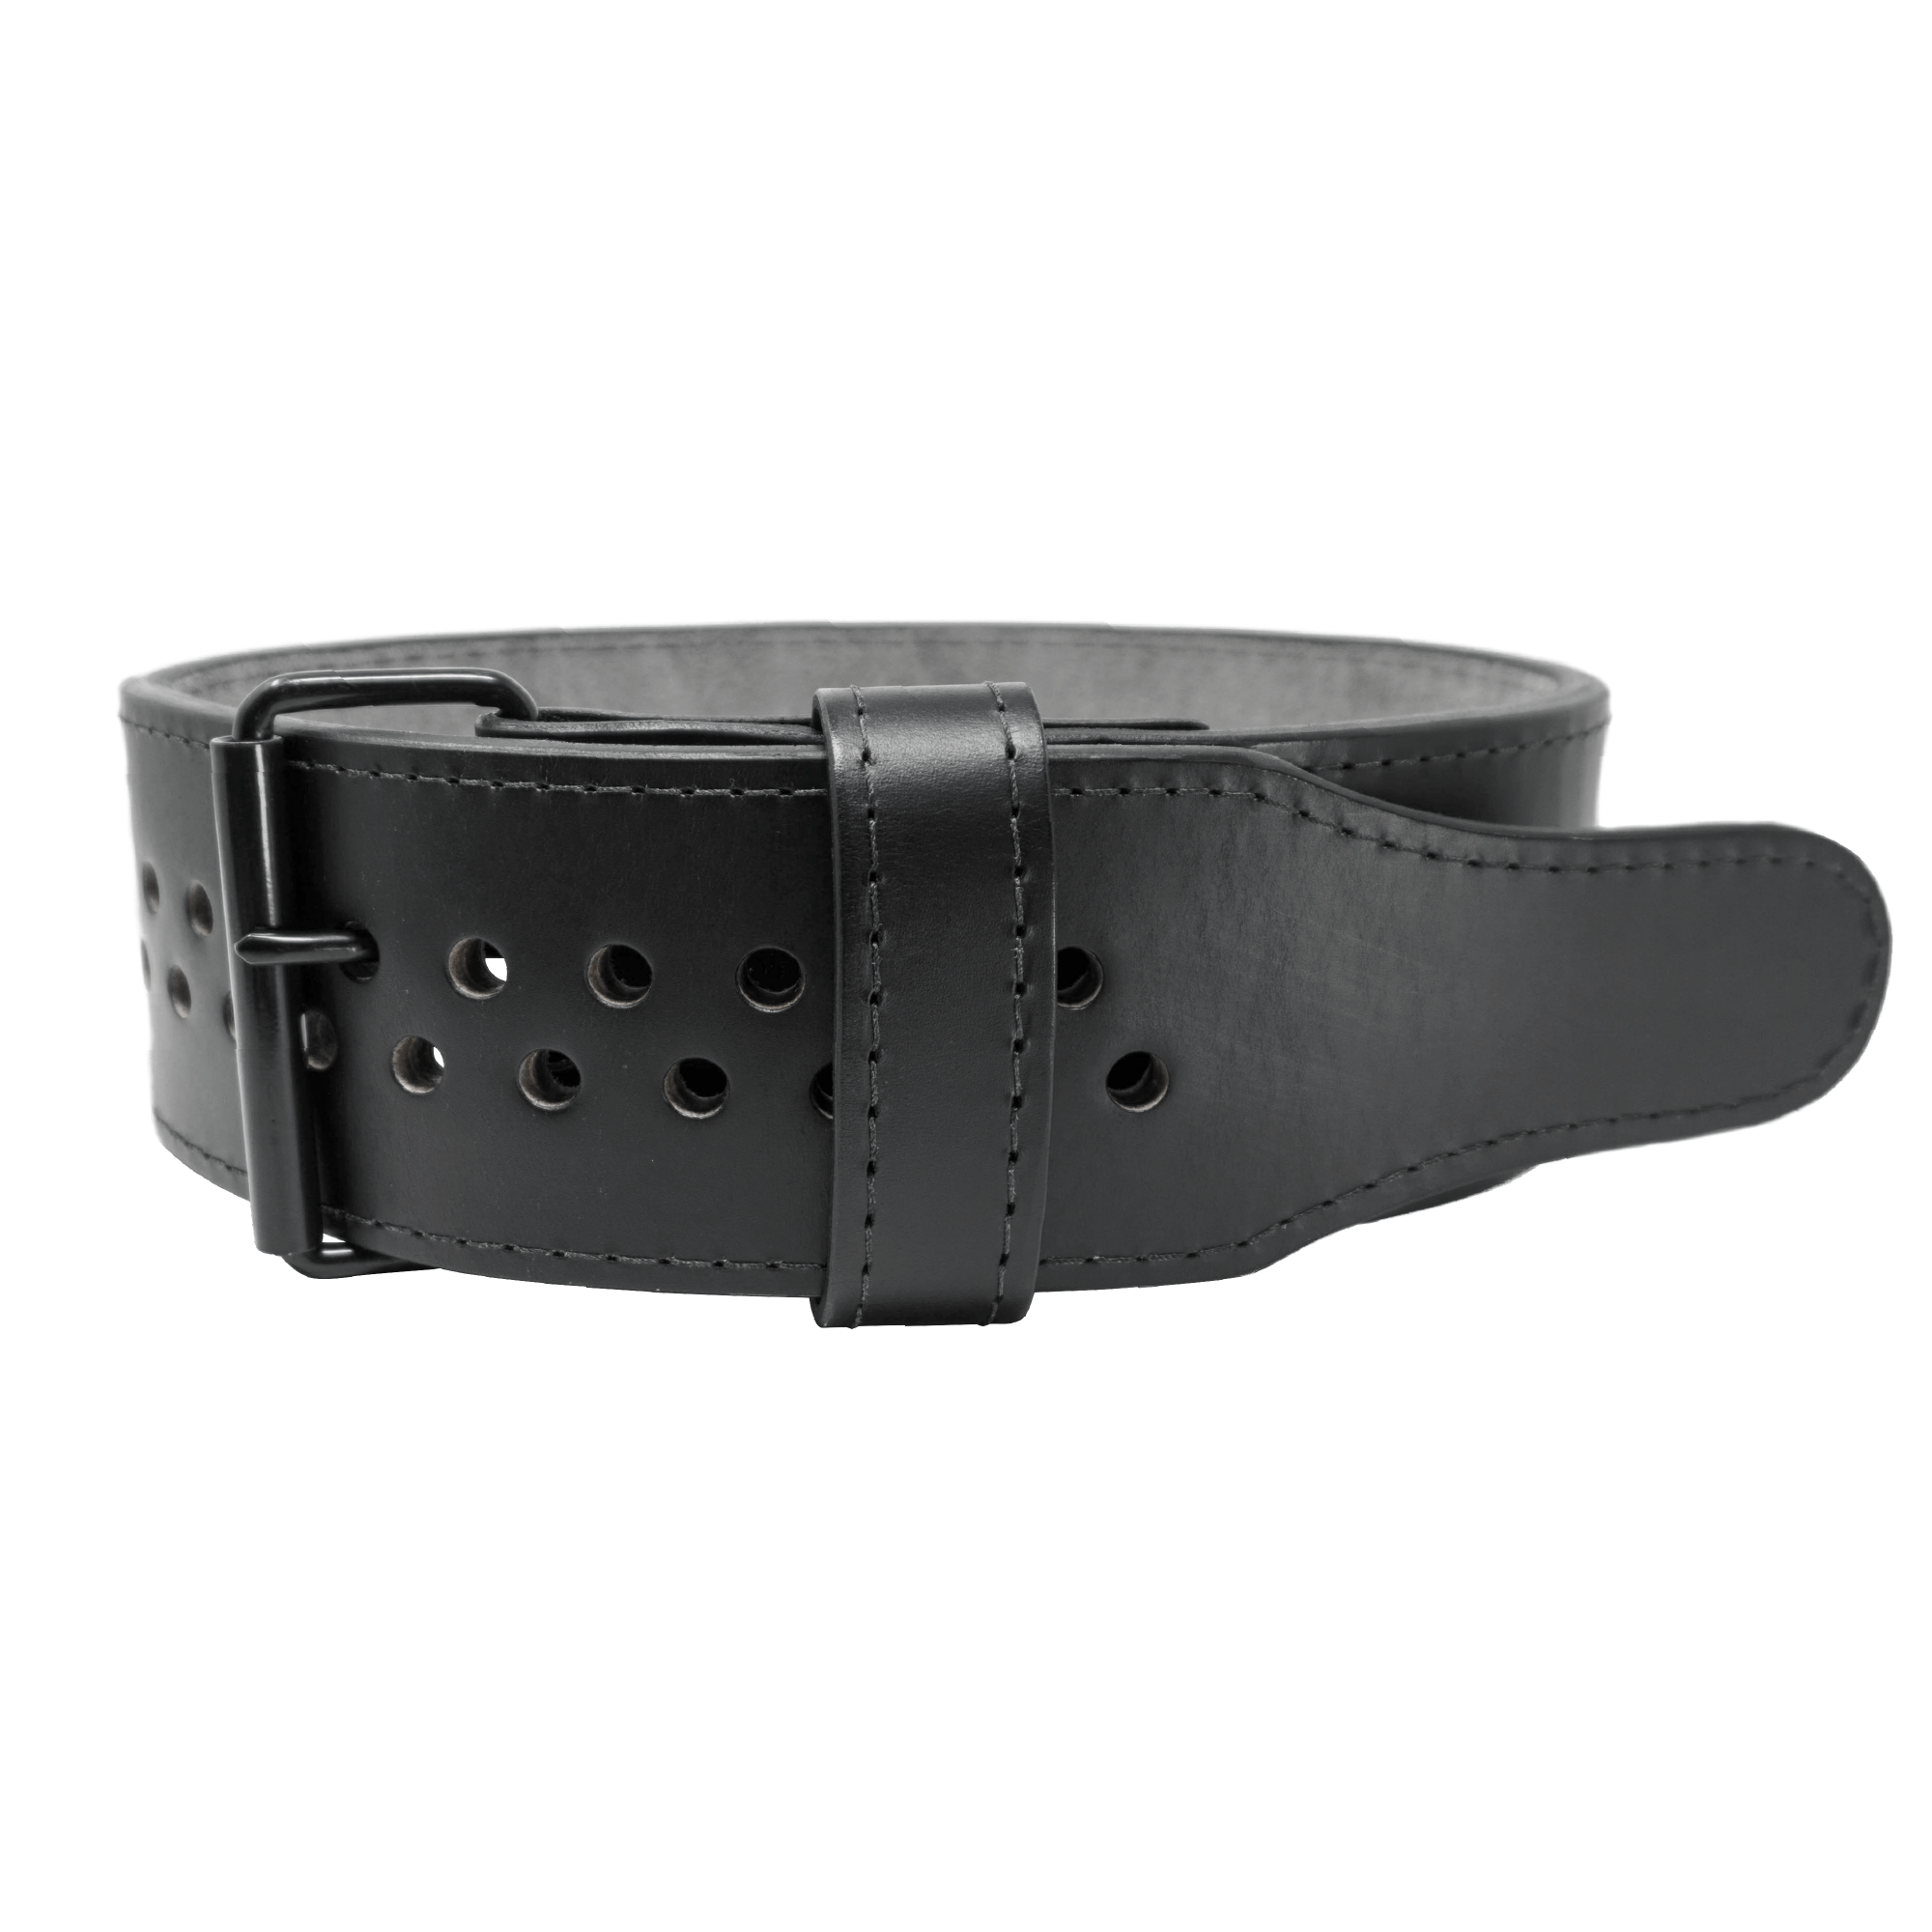 A7 Pioneer Cut Prong Belt - IPF Approved